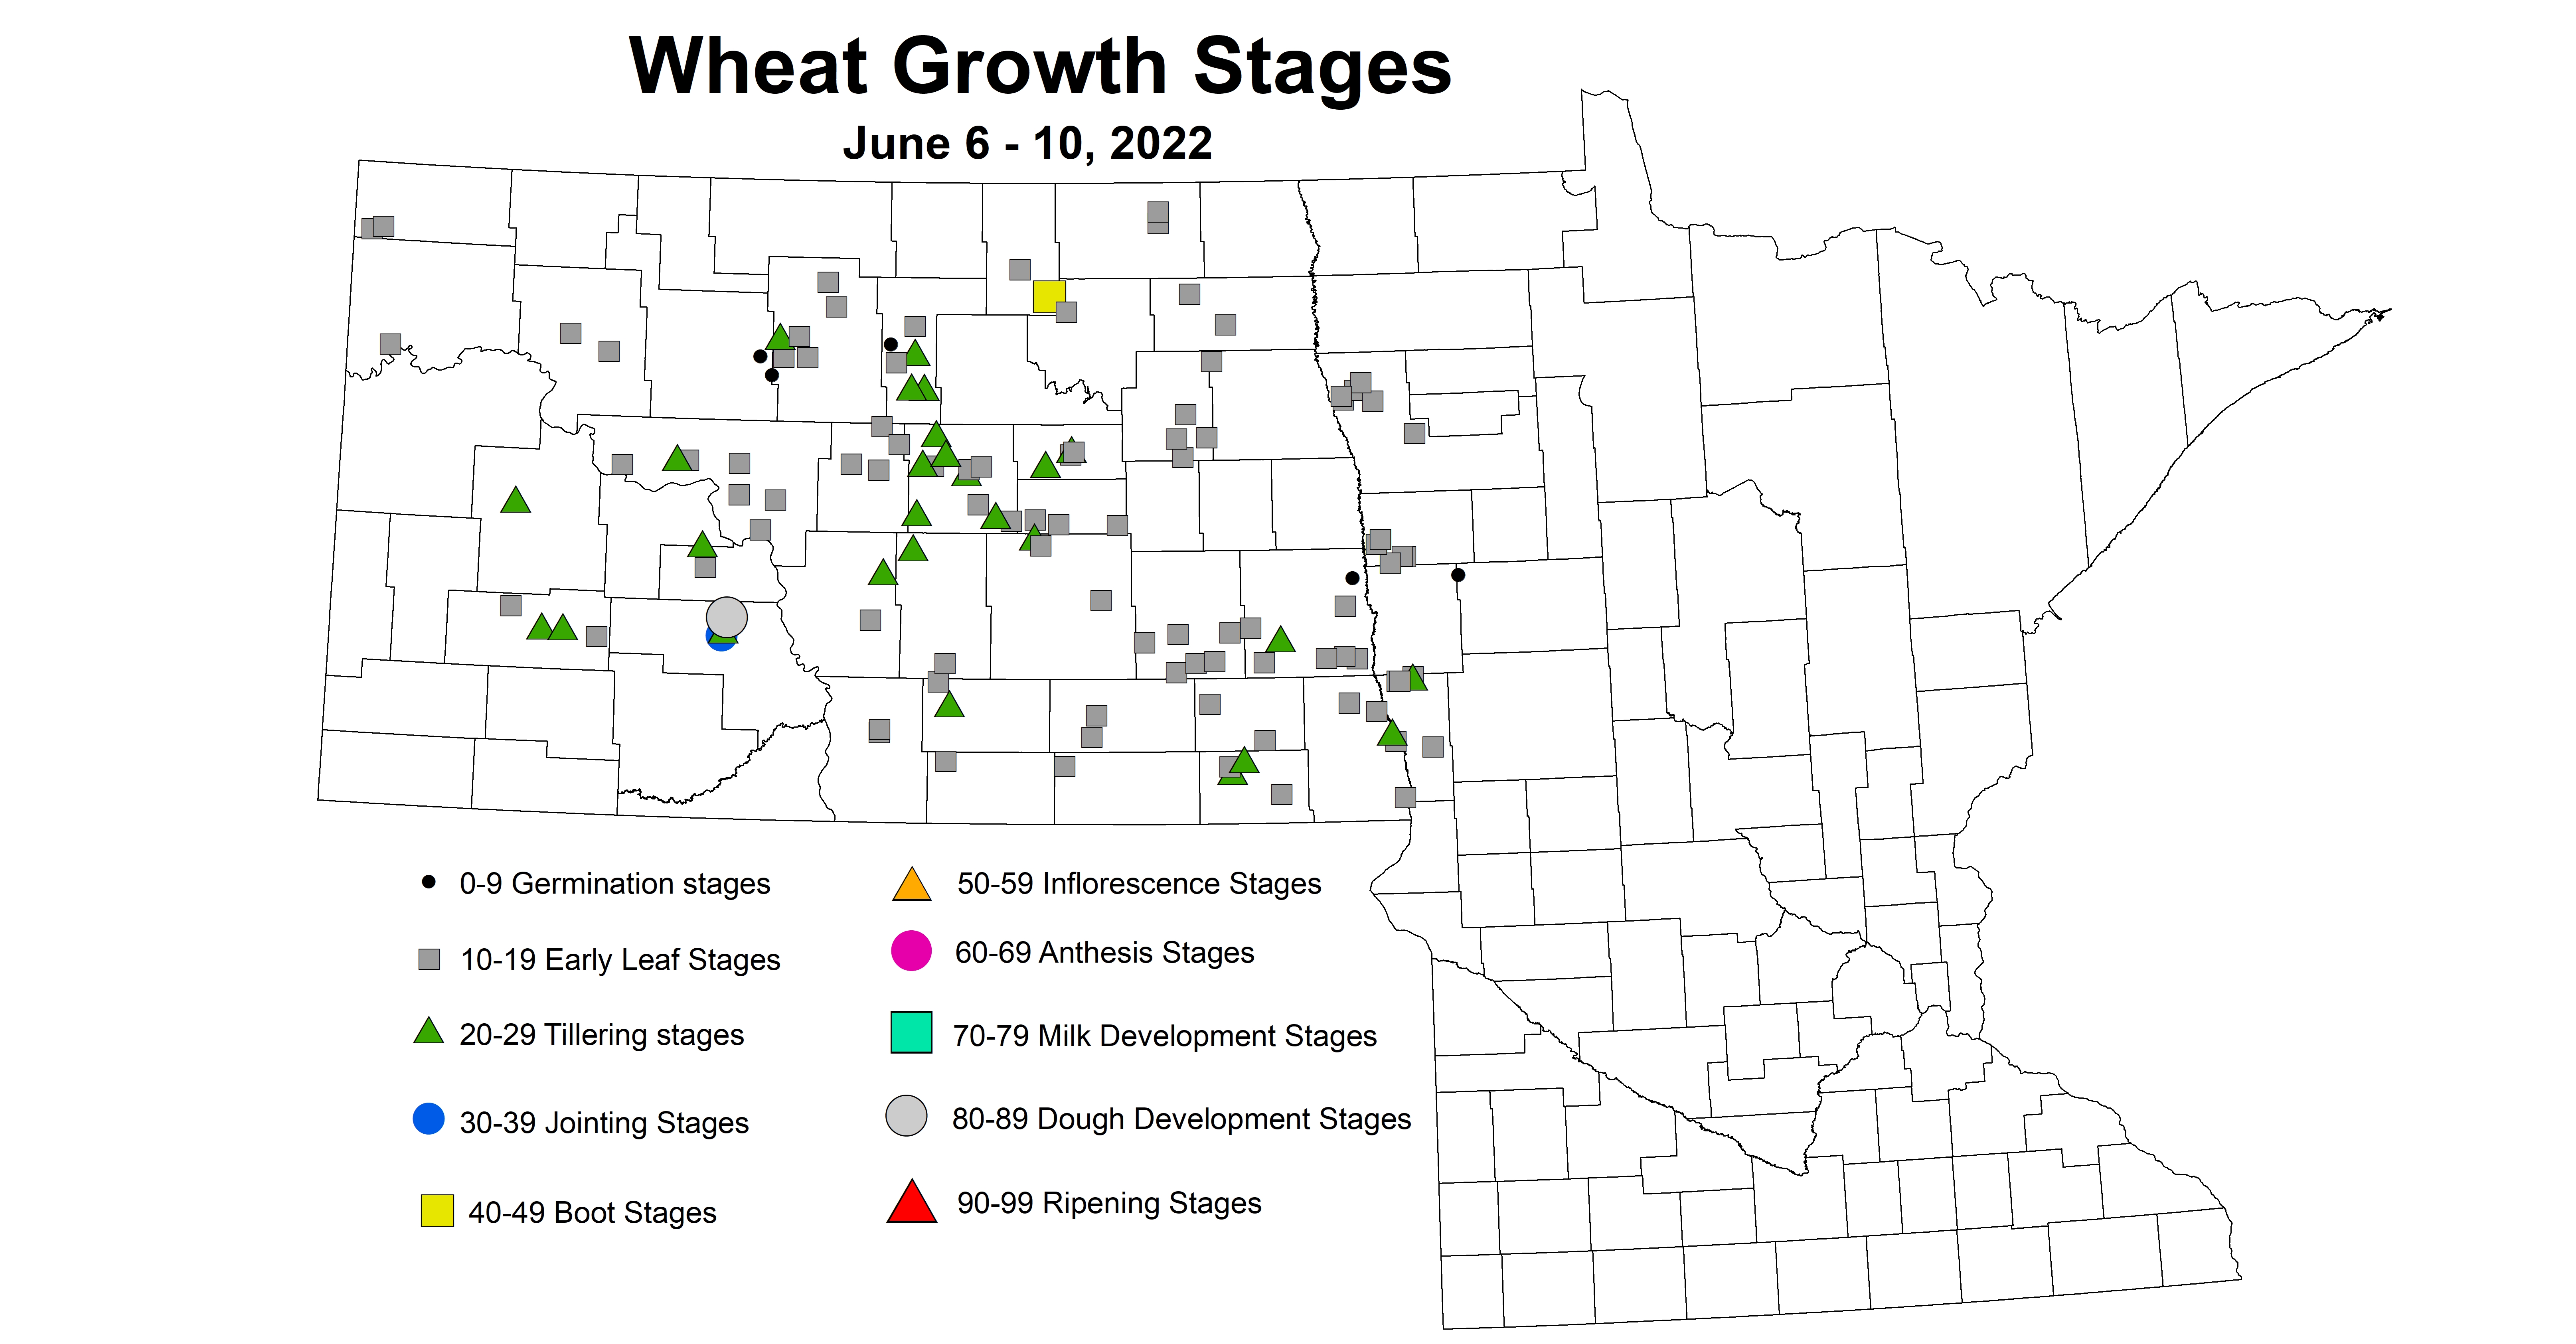 ND IPM map of wheat growth stages June 6-10, 2022